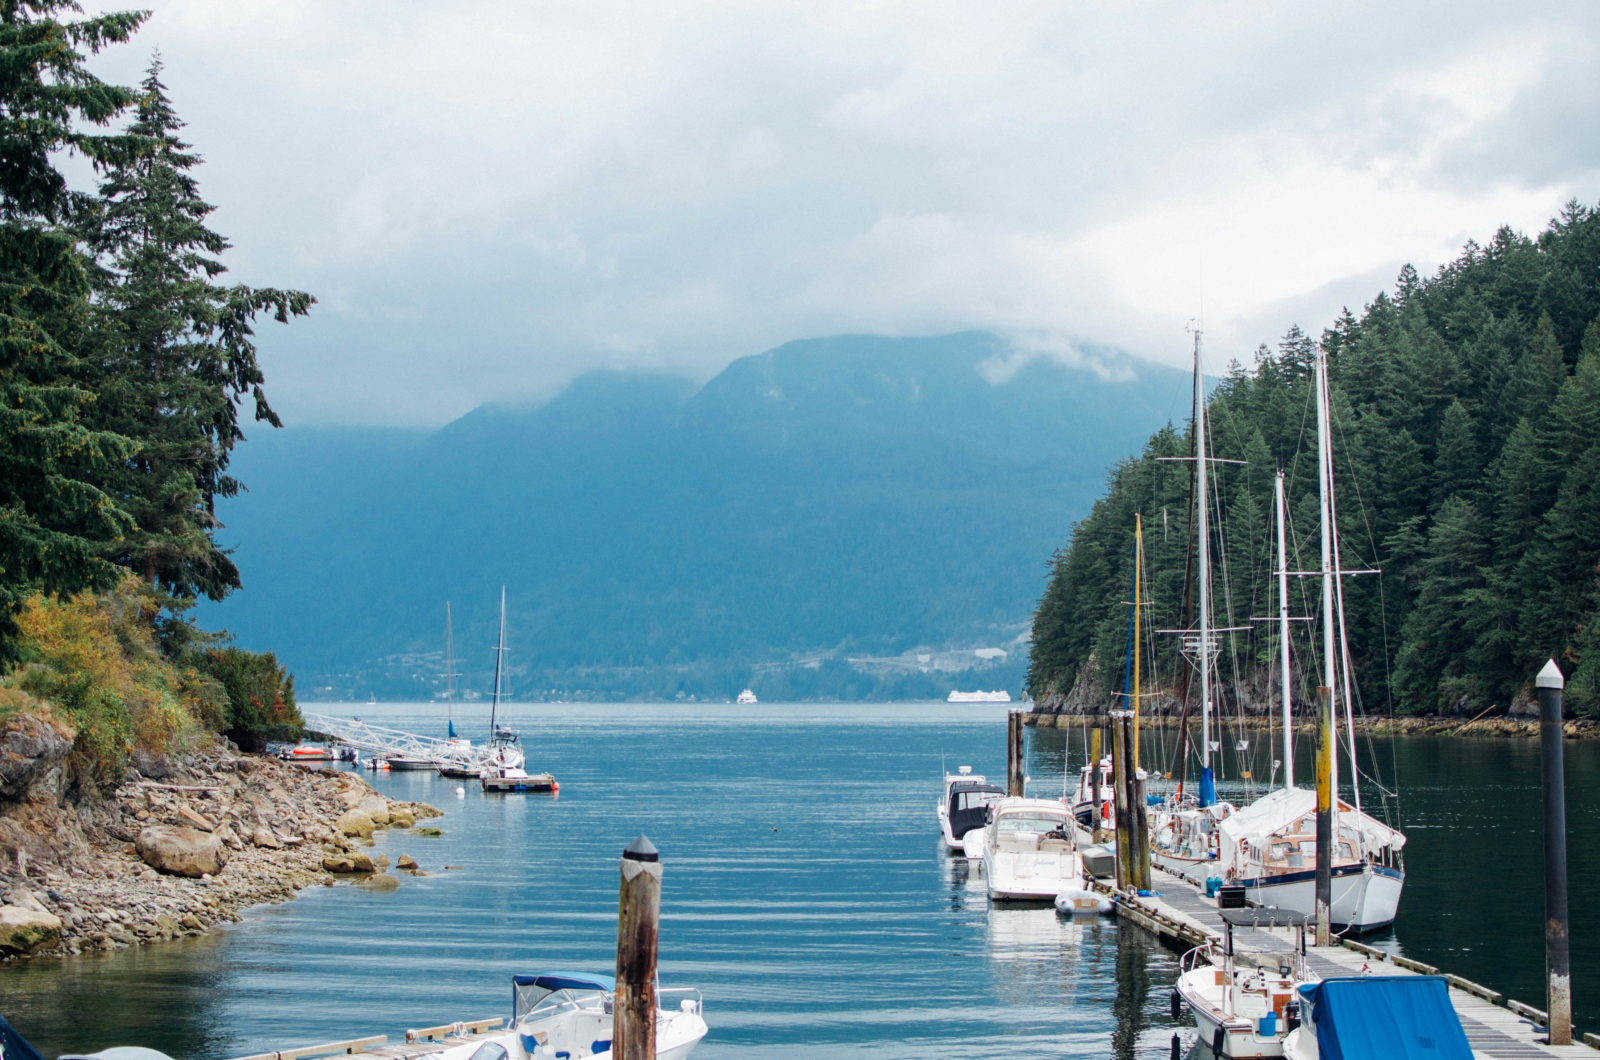 A 30 minute trip from Vancouver, Bowen Island is idyllic with its pristine beauty, tranquil shores and a perfect getaway.